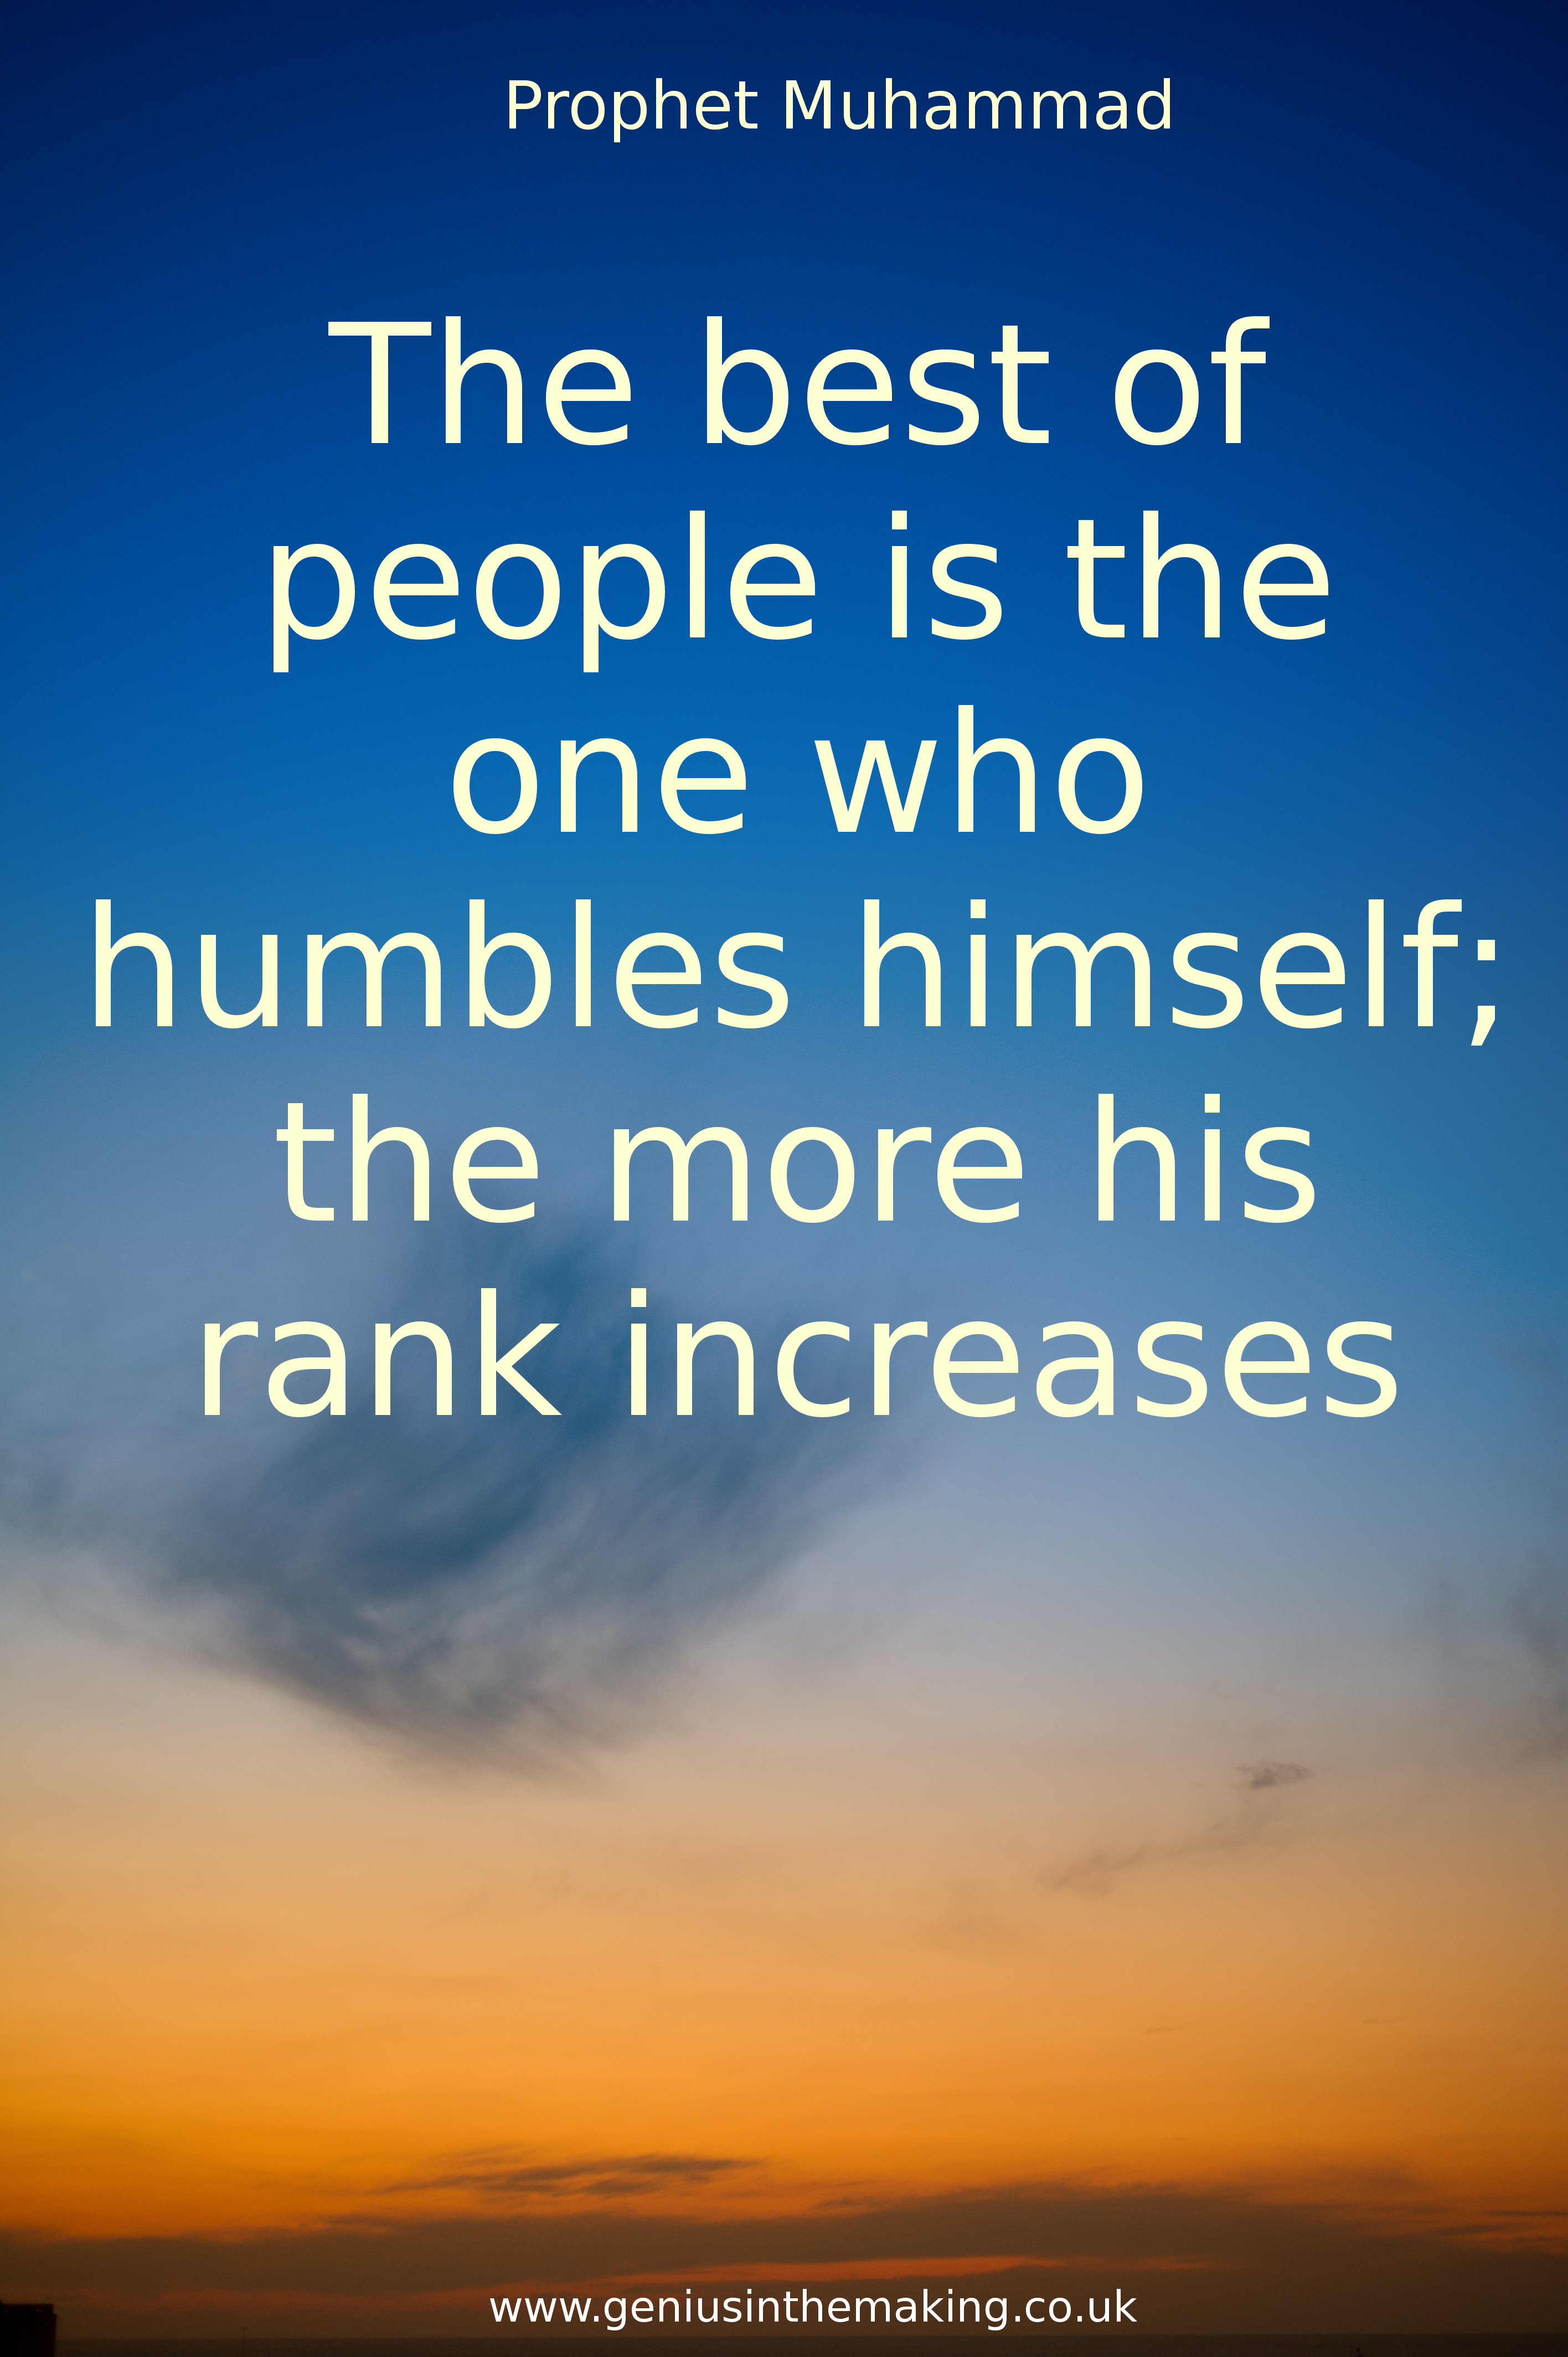 The best of people is the one who humbles himself; the more his rank increases